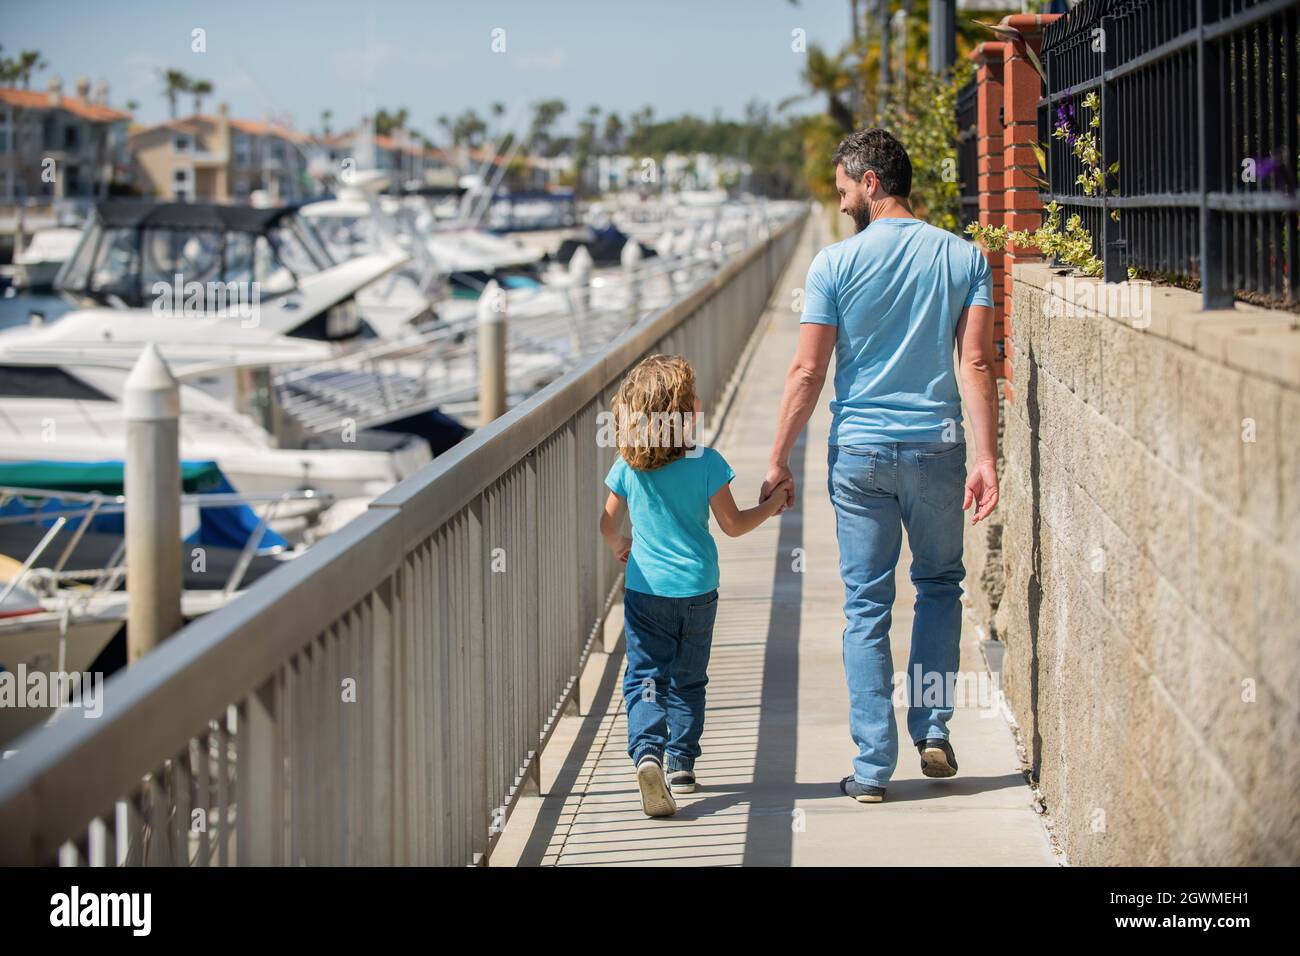 single dad leading small kid outside back view, family Stock Photo